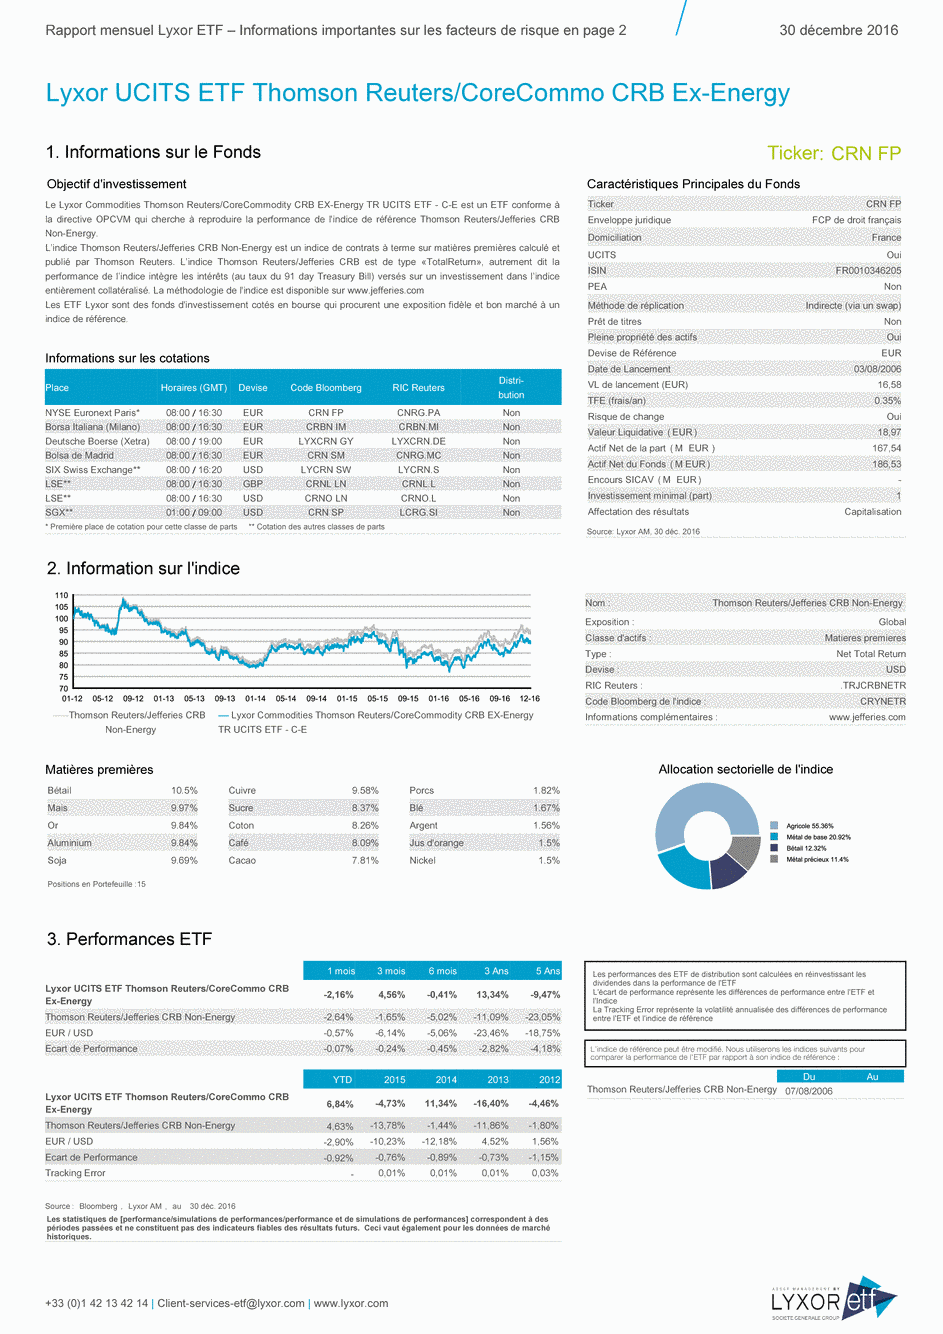 Reporting Lyxor Commodities Thomson Reuters/CoreCommodity CRB EX-Energy TR UCITS ETF - Acc - 30/12/2016 - Français